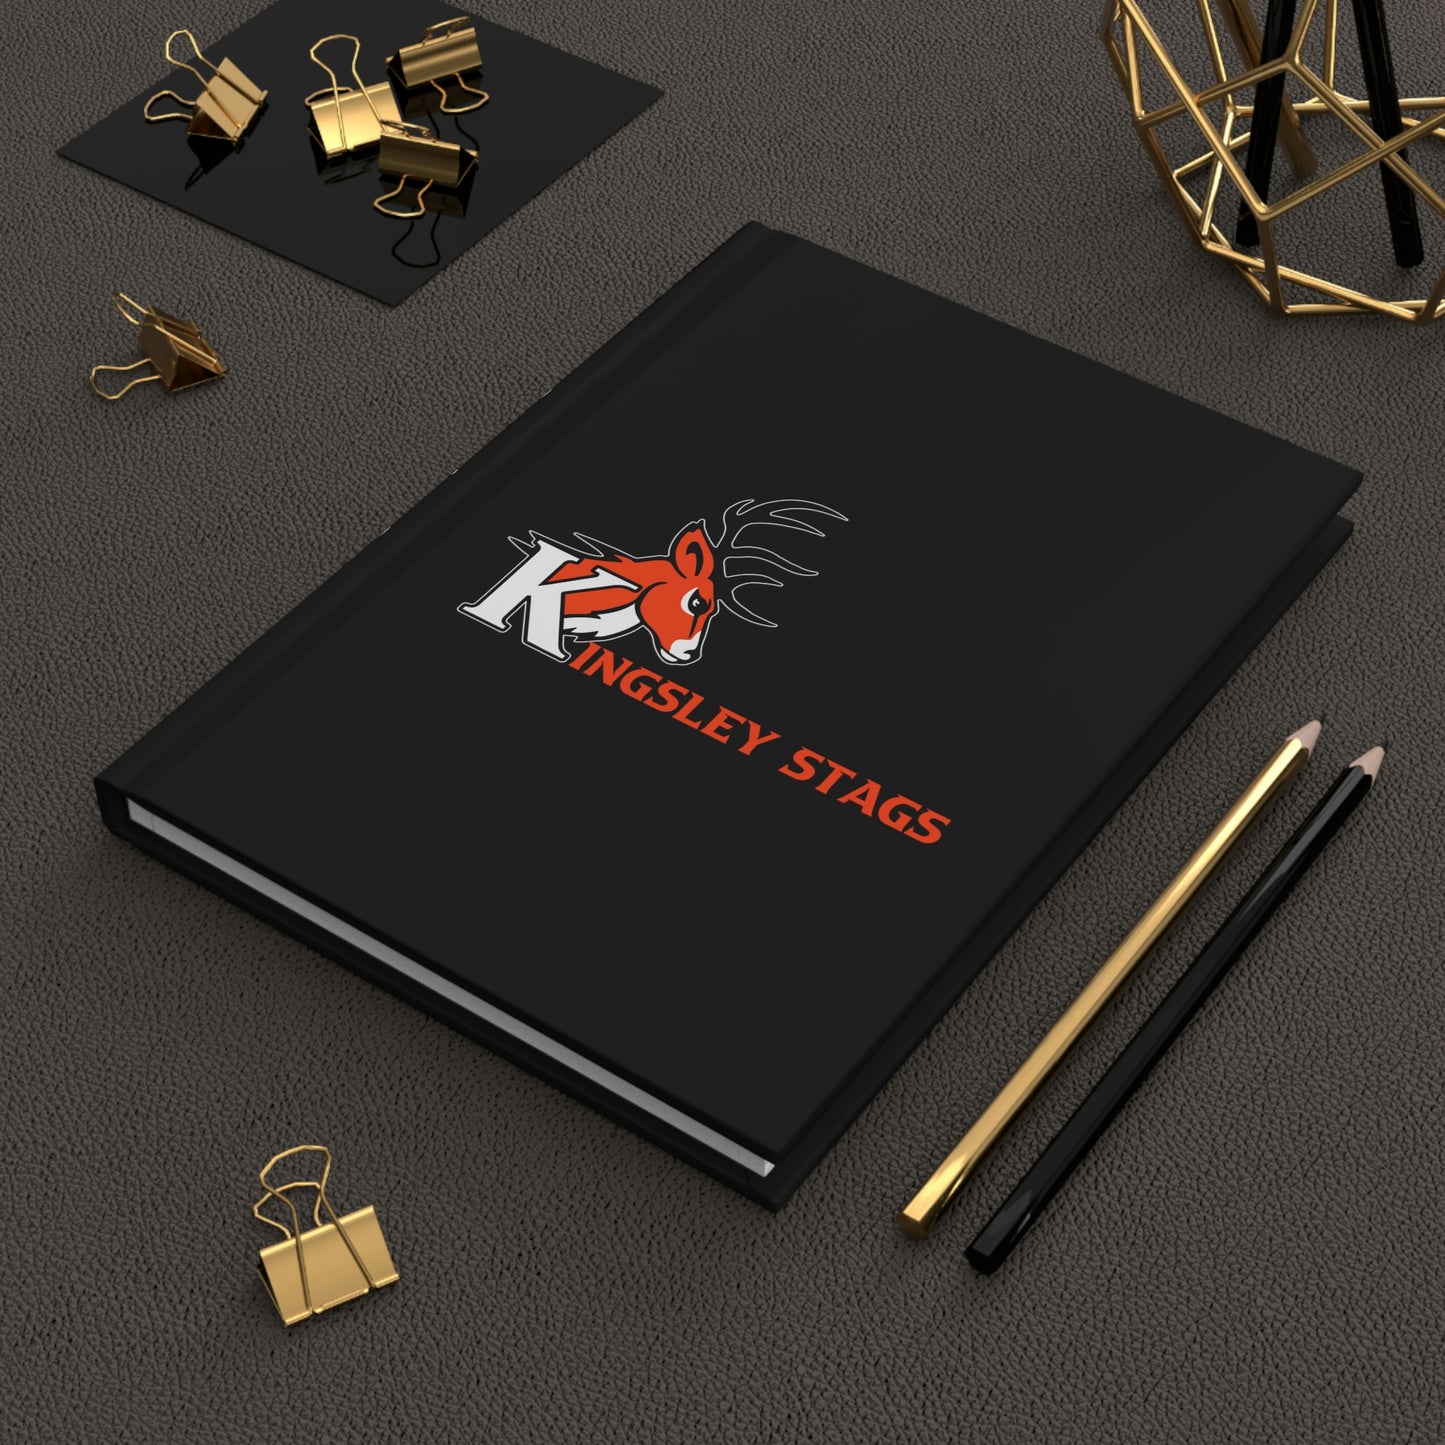 Stags Logo 2 Hardcover Journal Matte #H11-01C